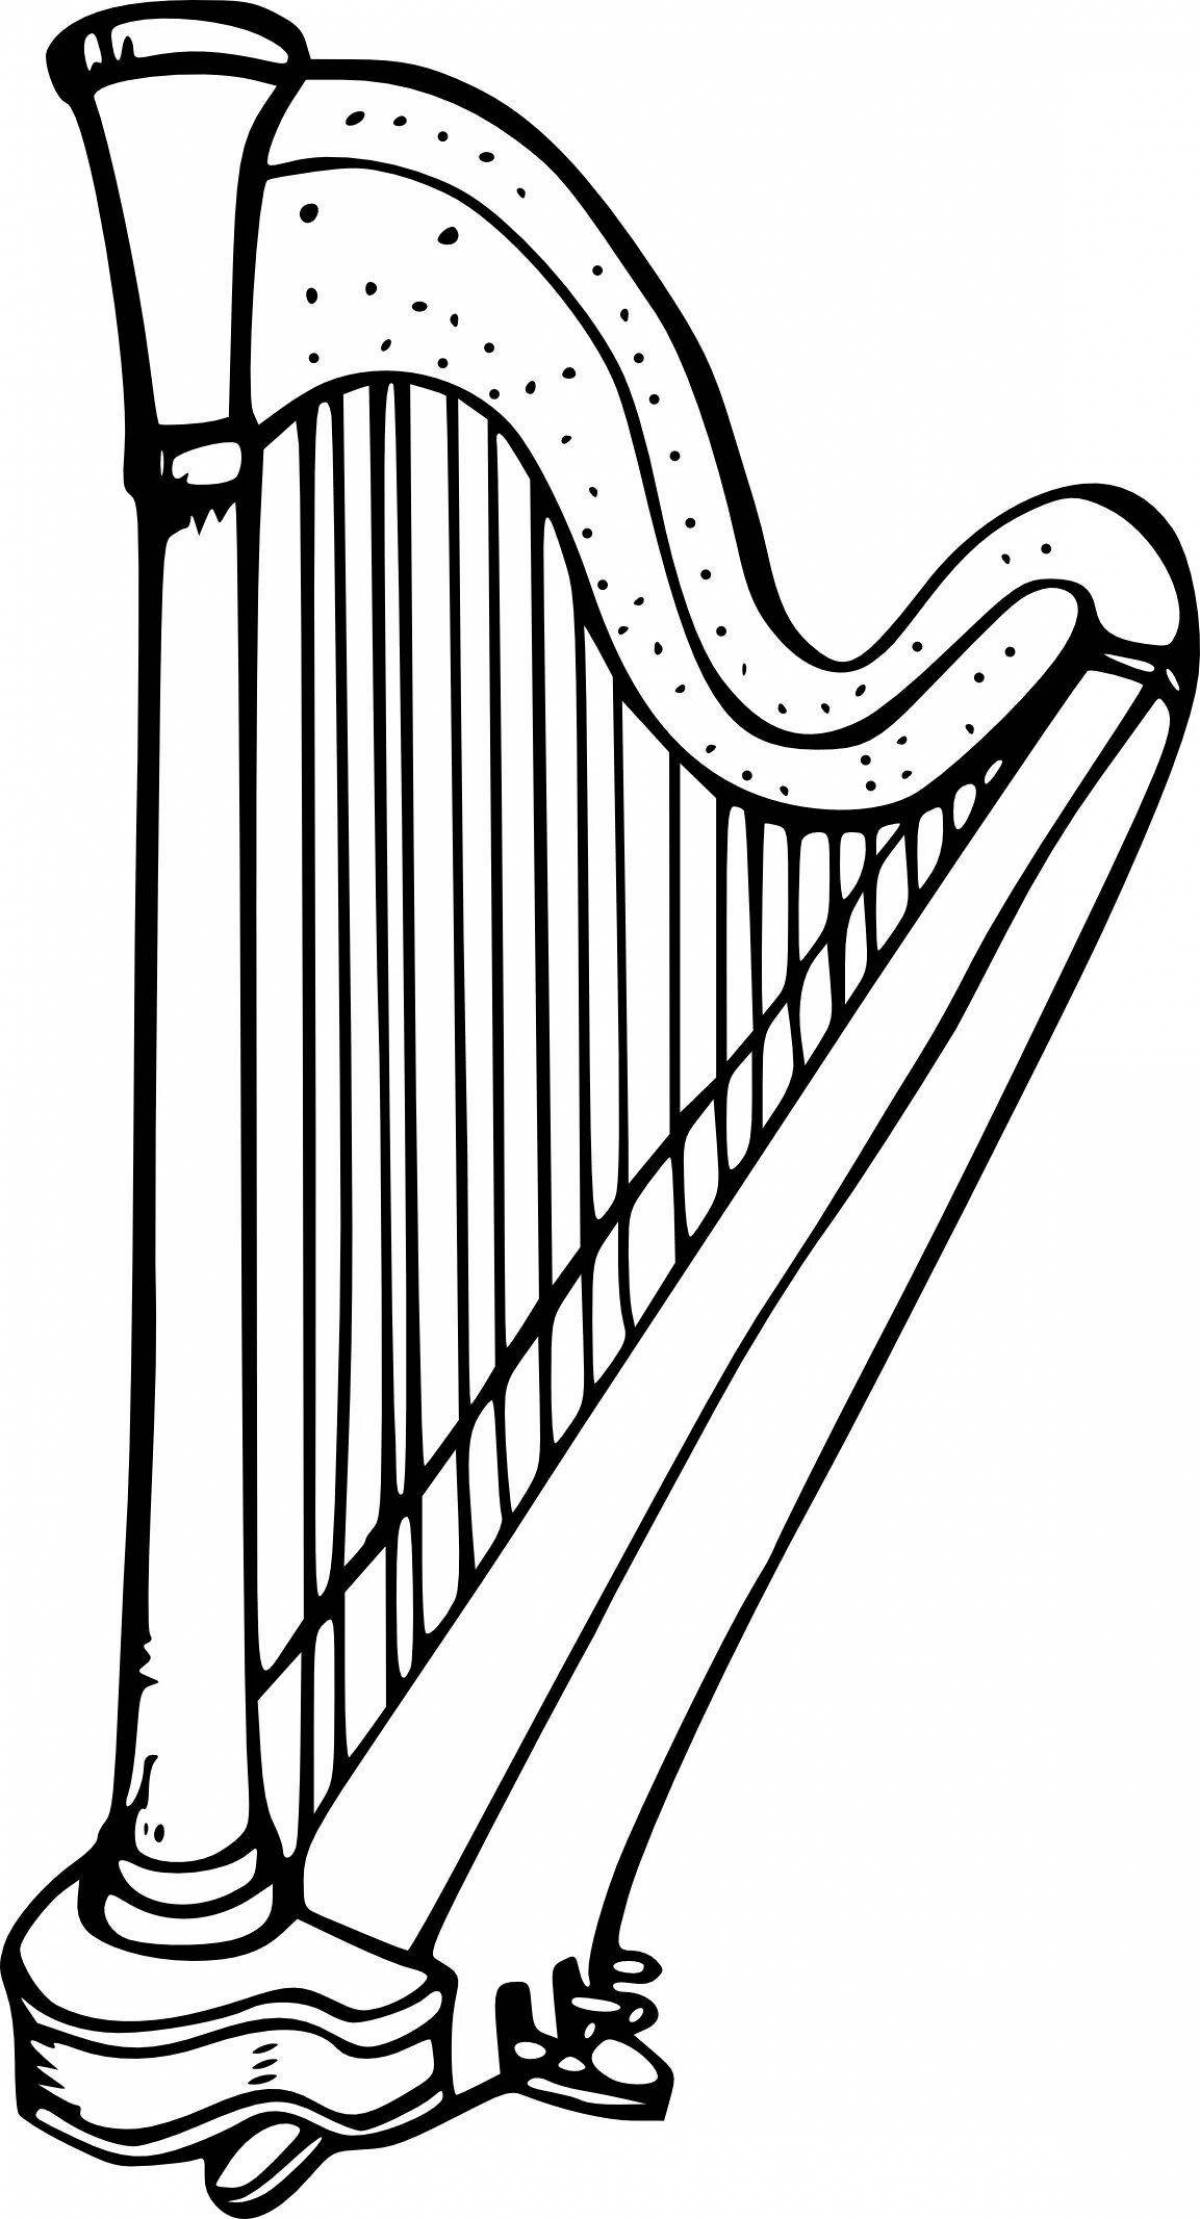 Bright harp coloring book for kids